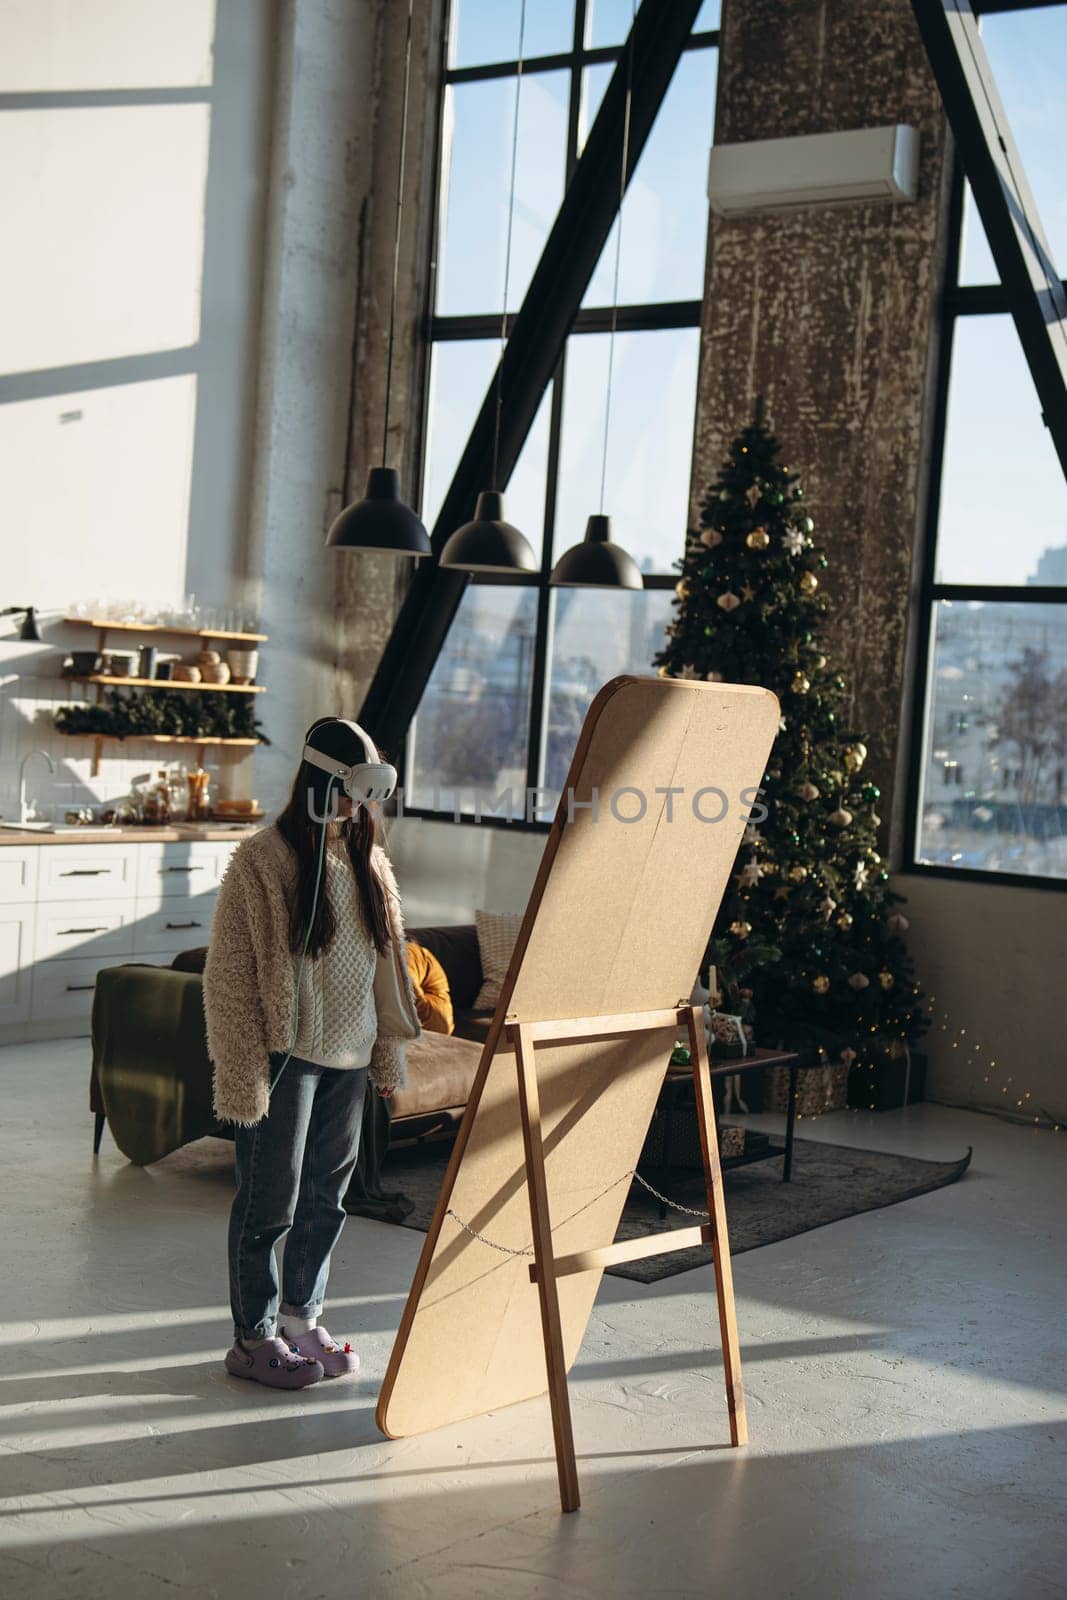 A young woman in light clothing and a virtual reality headset stands in front of the mirror in a Christmas atmosphere. High quality photo